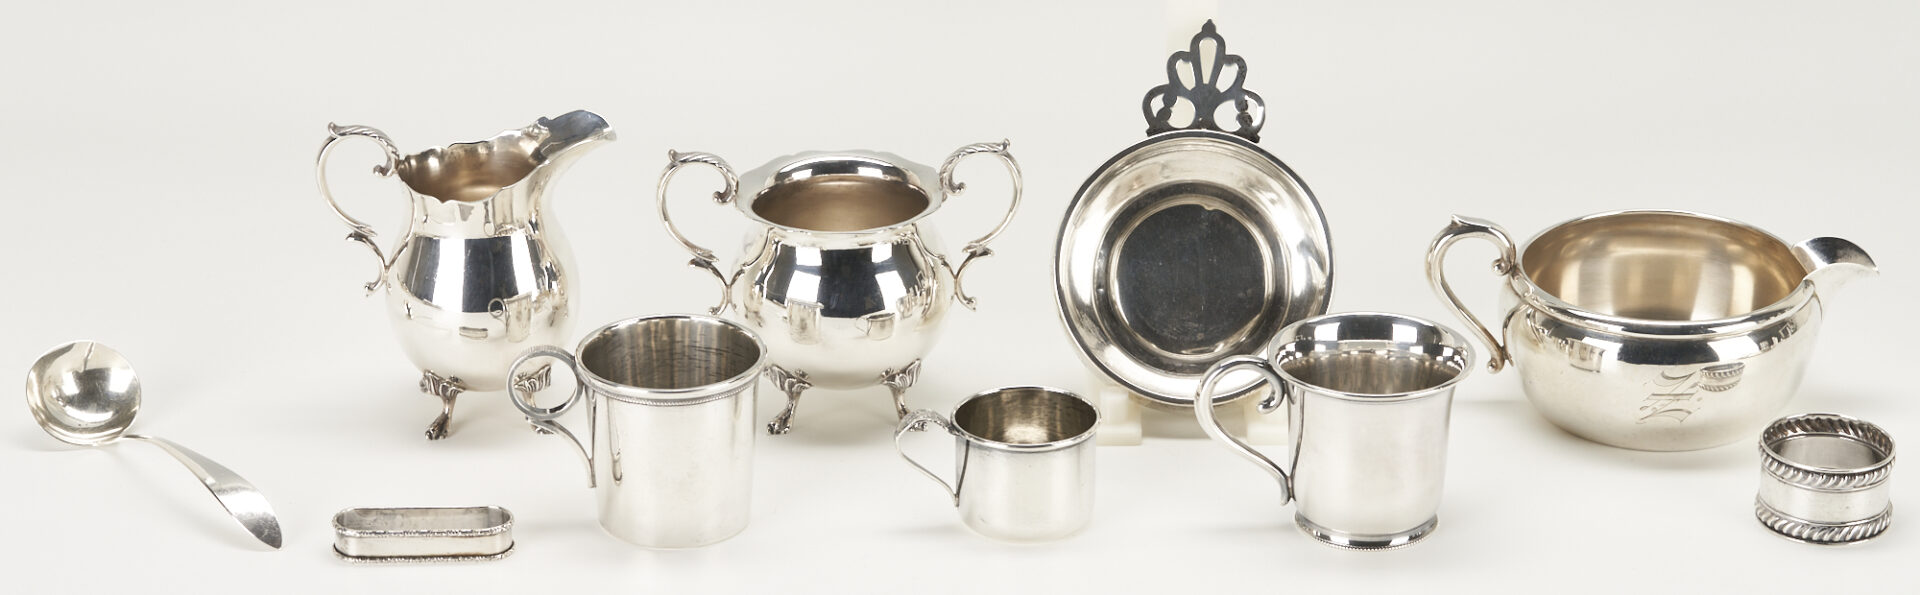 Lot 676: 16 pcs. Assd. Sterling Silver, Mostly Hollowware